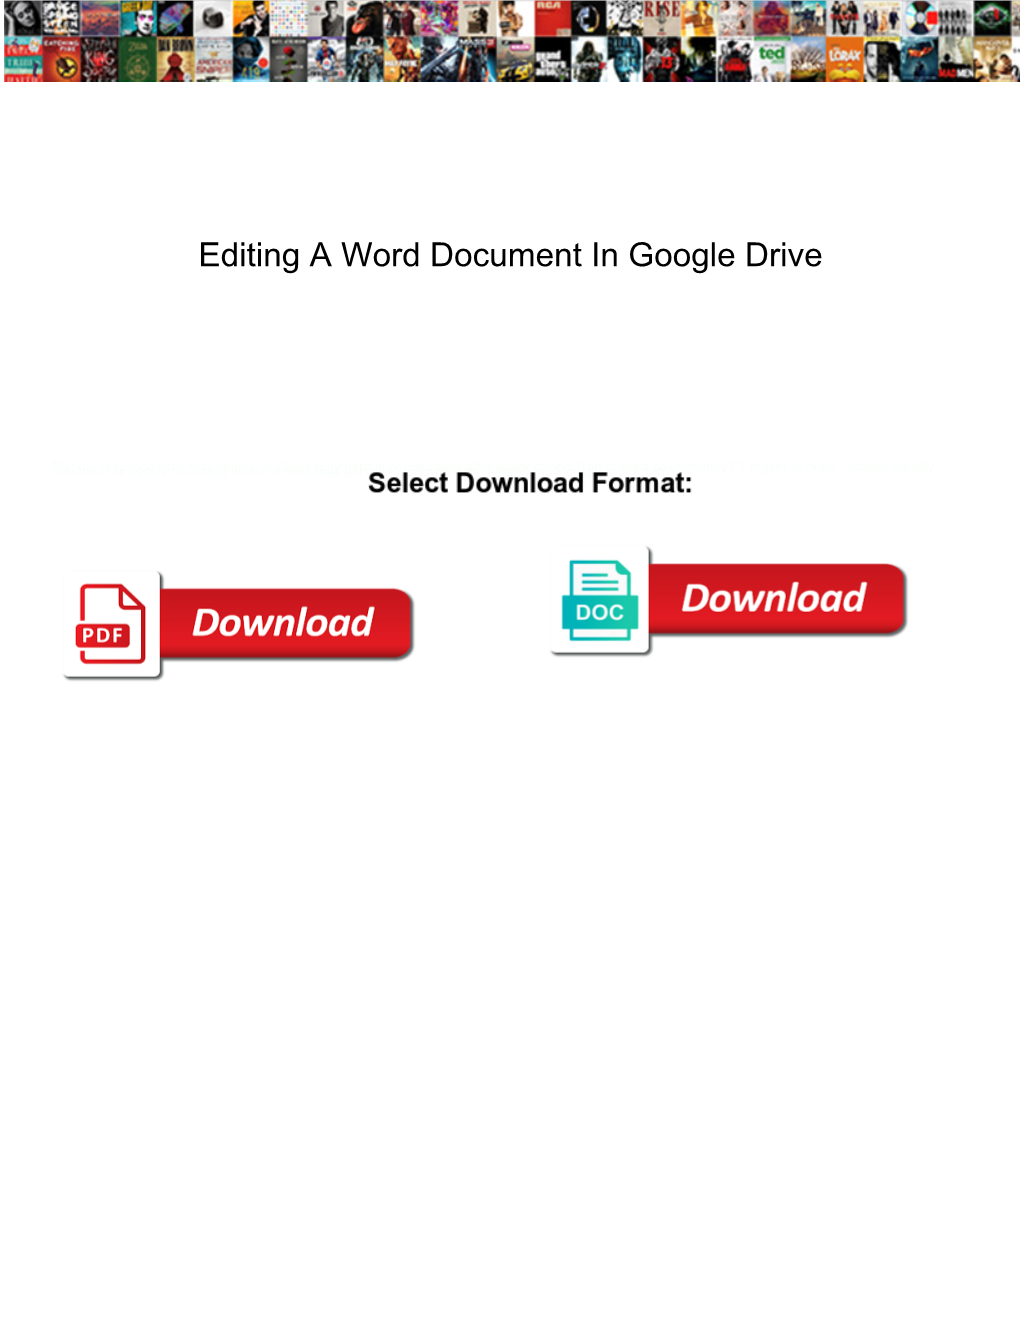 Editing a Word Document in Google Drive